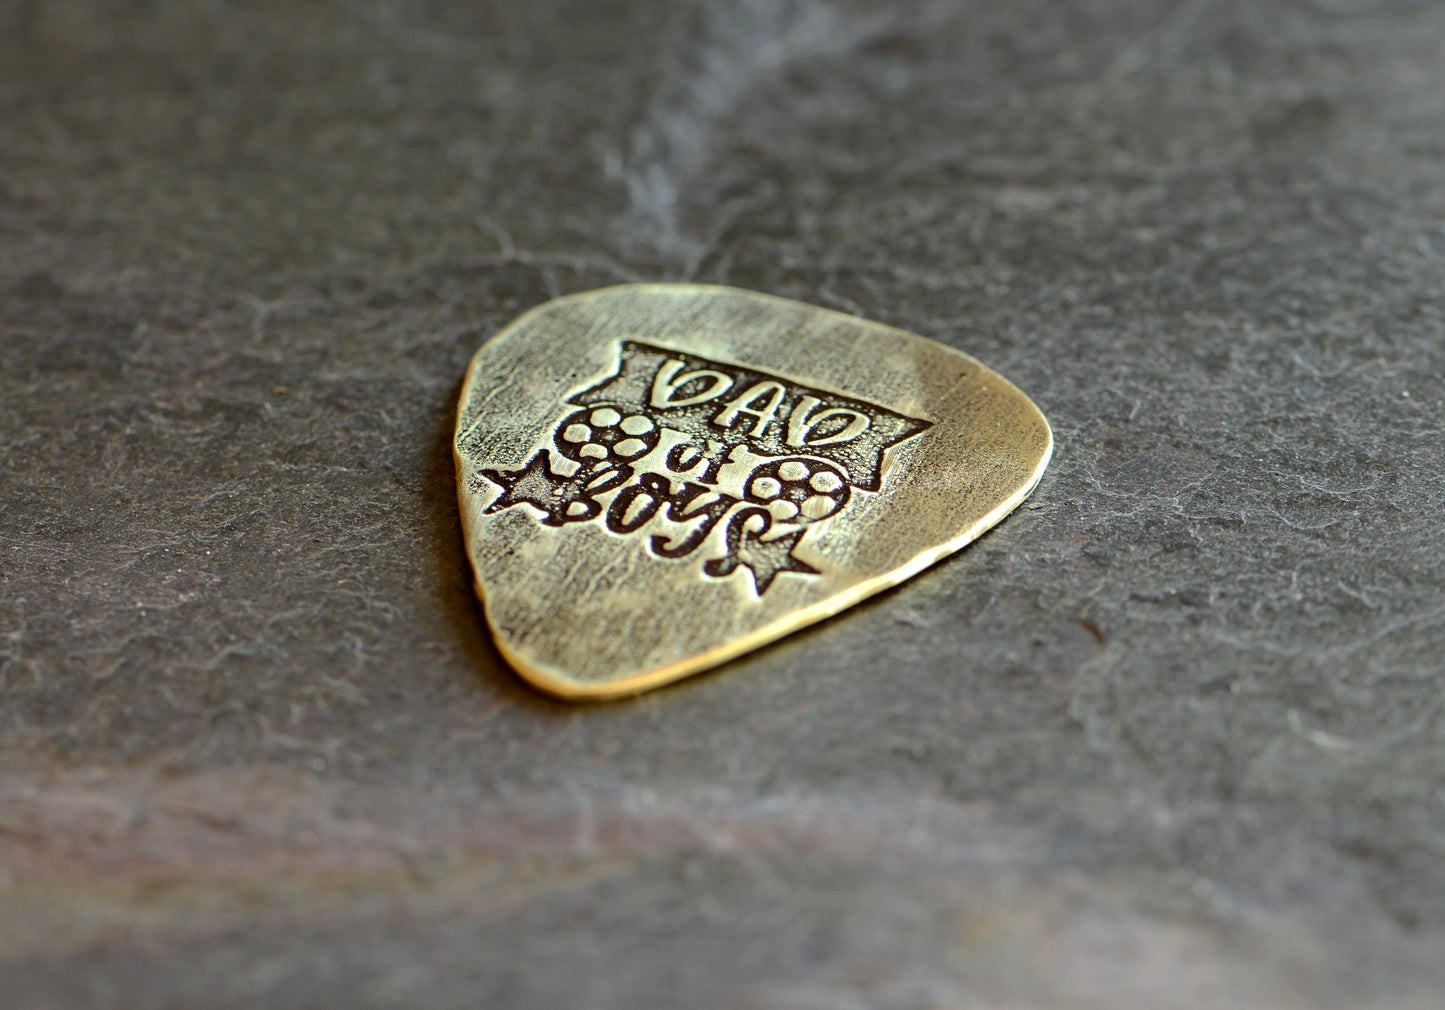 Brass guitar pick for dad of boys